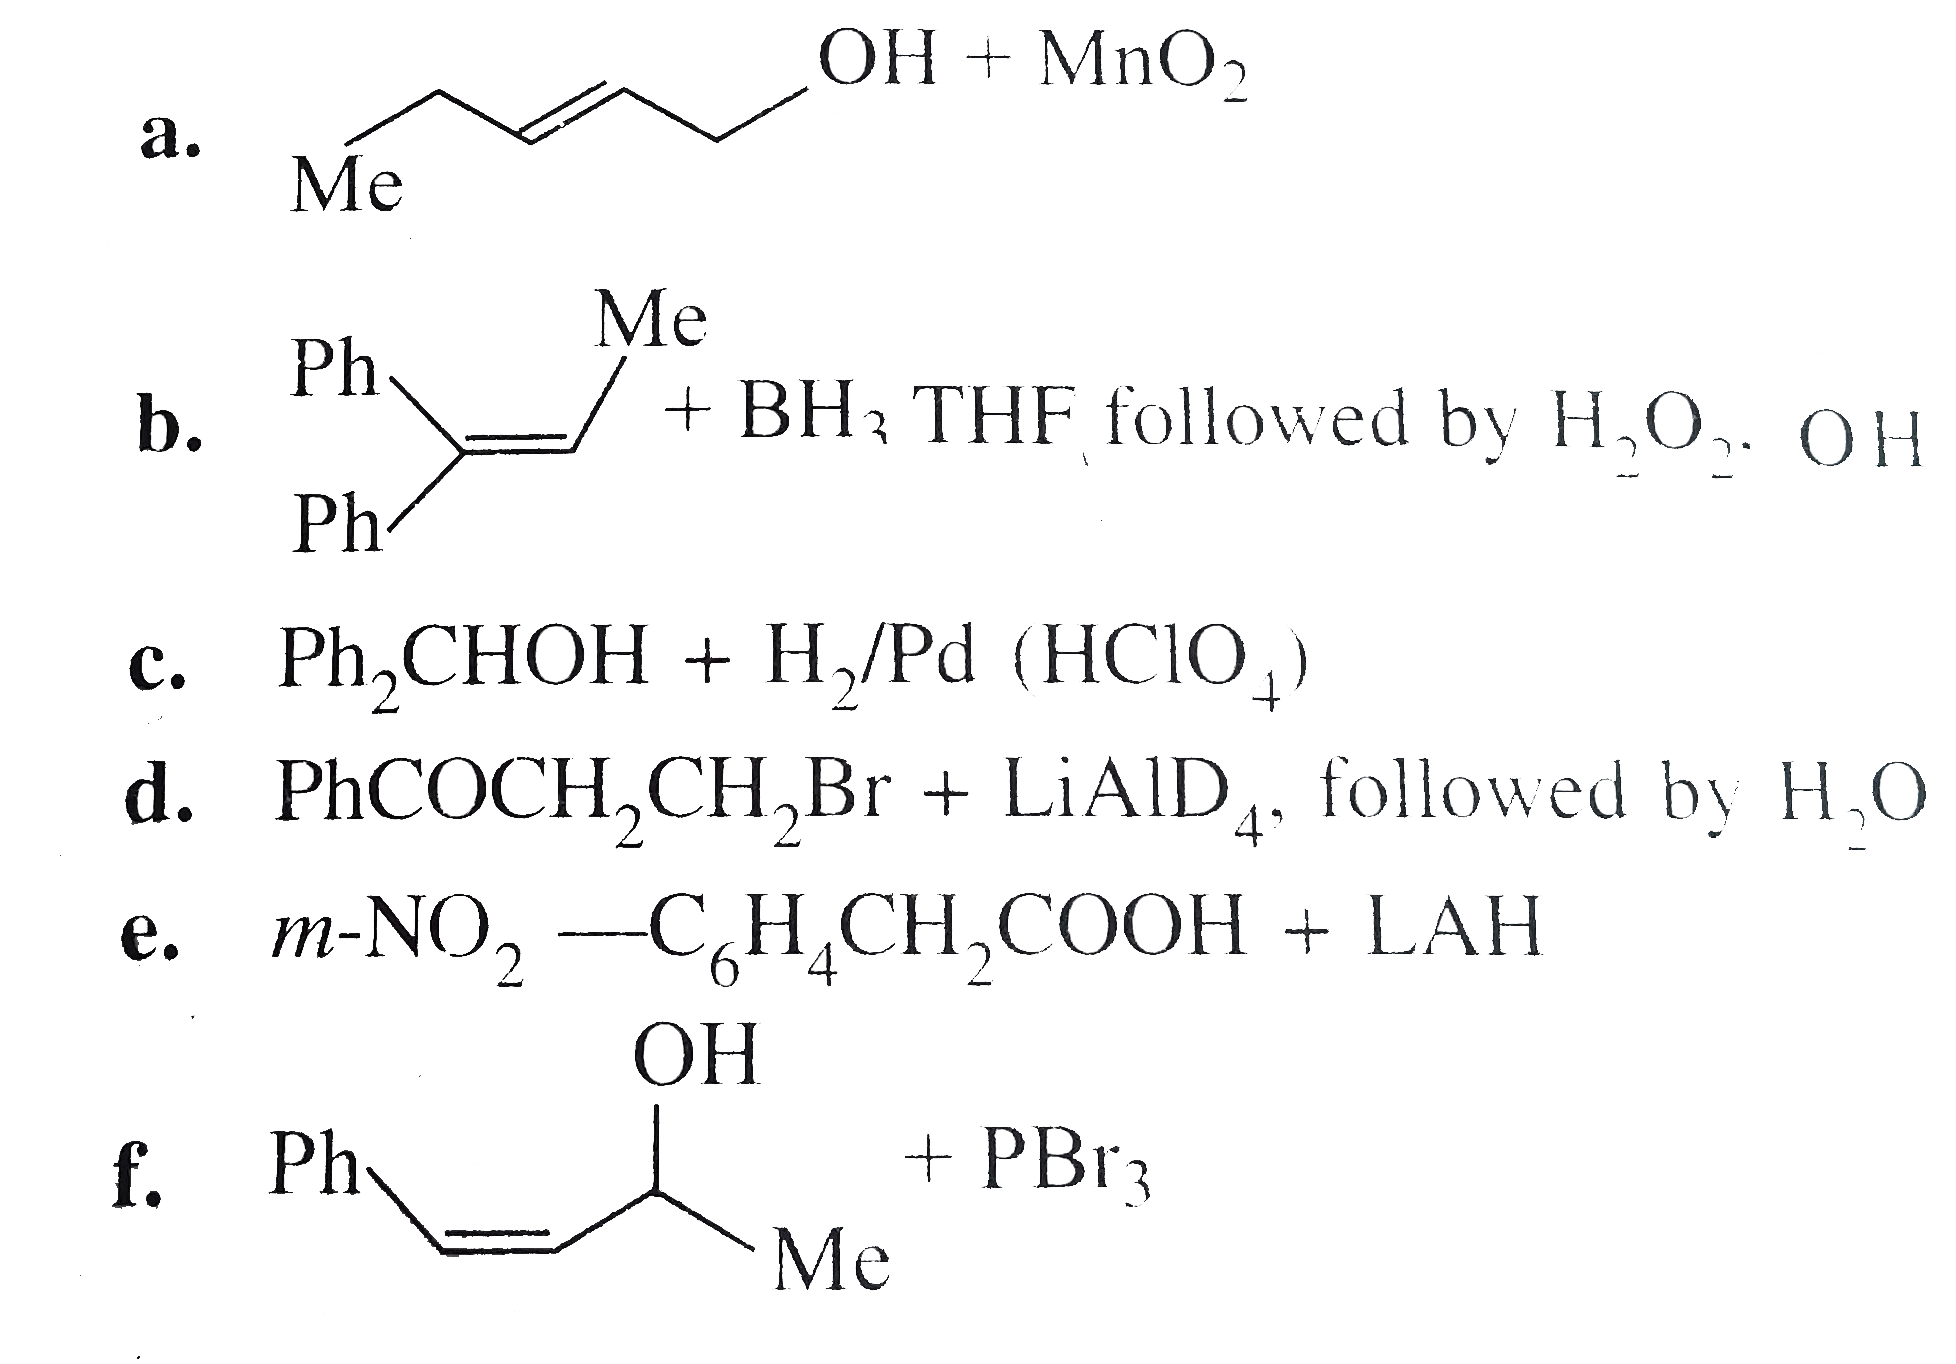 Give the product of each of the following reactions: